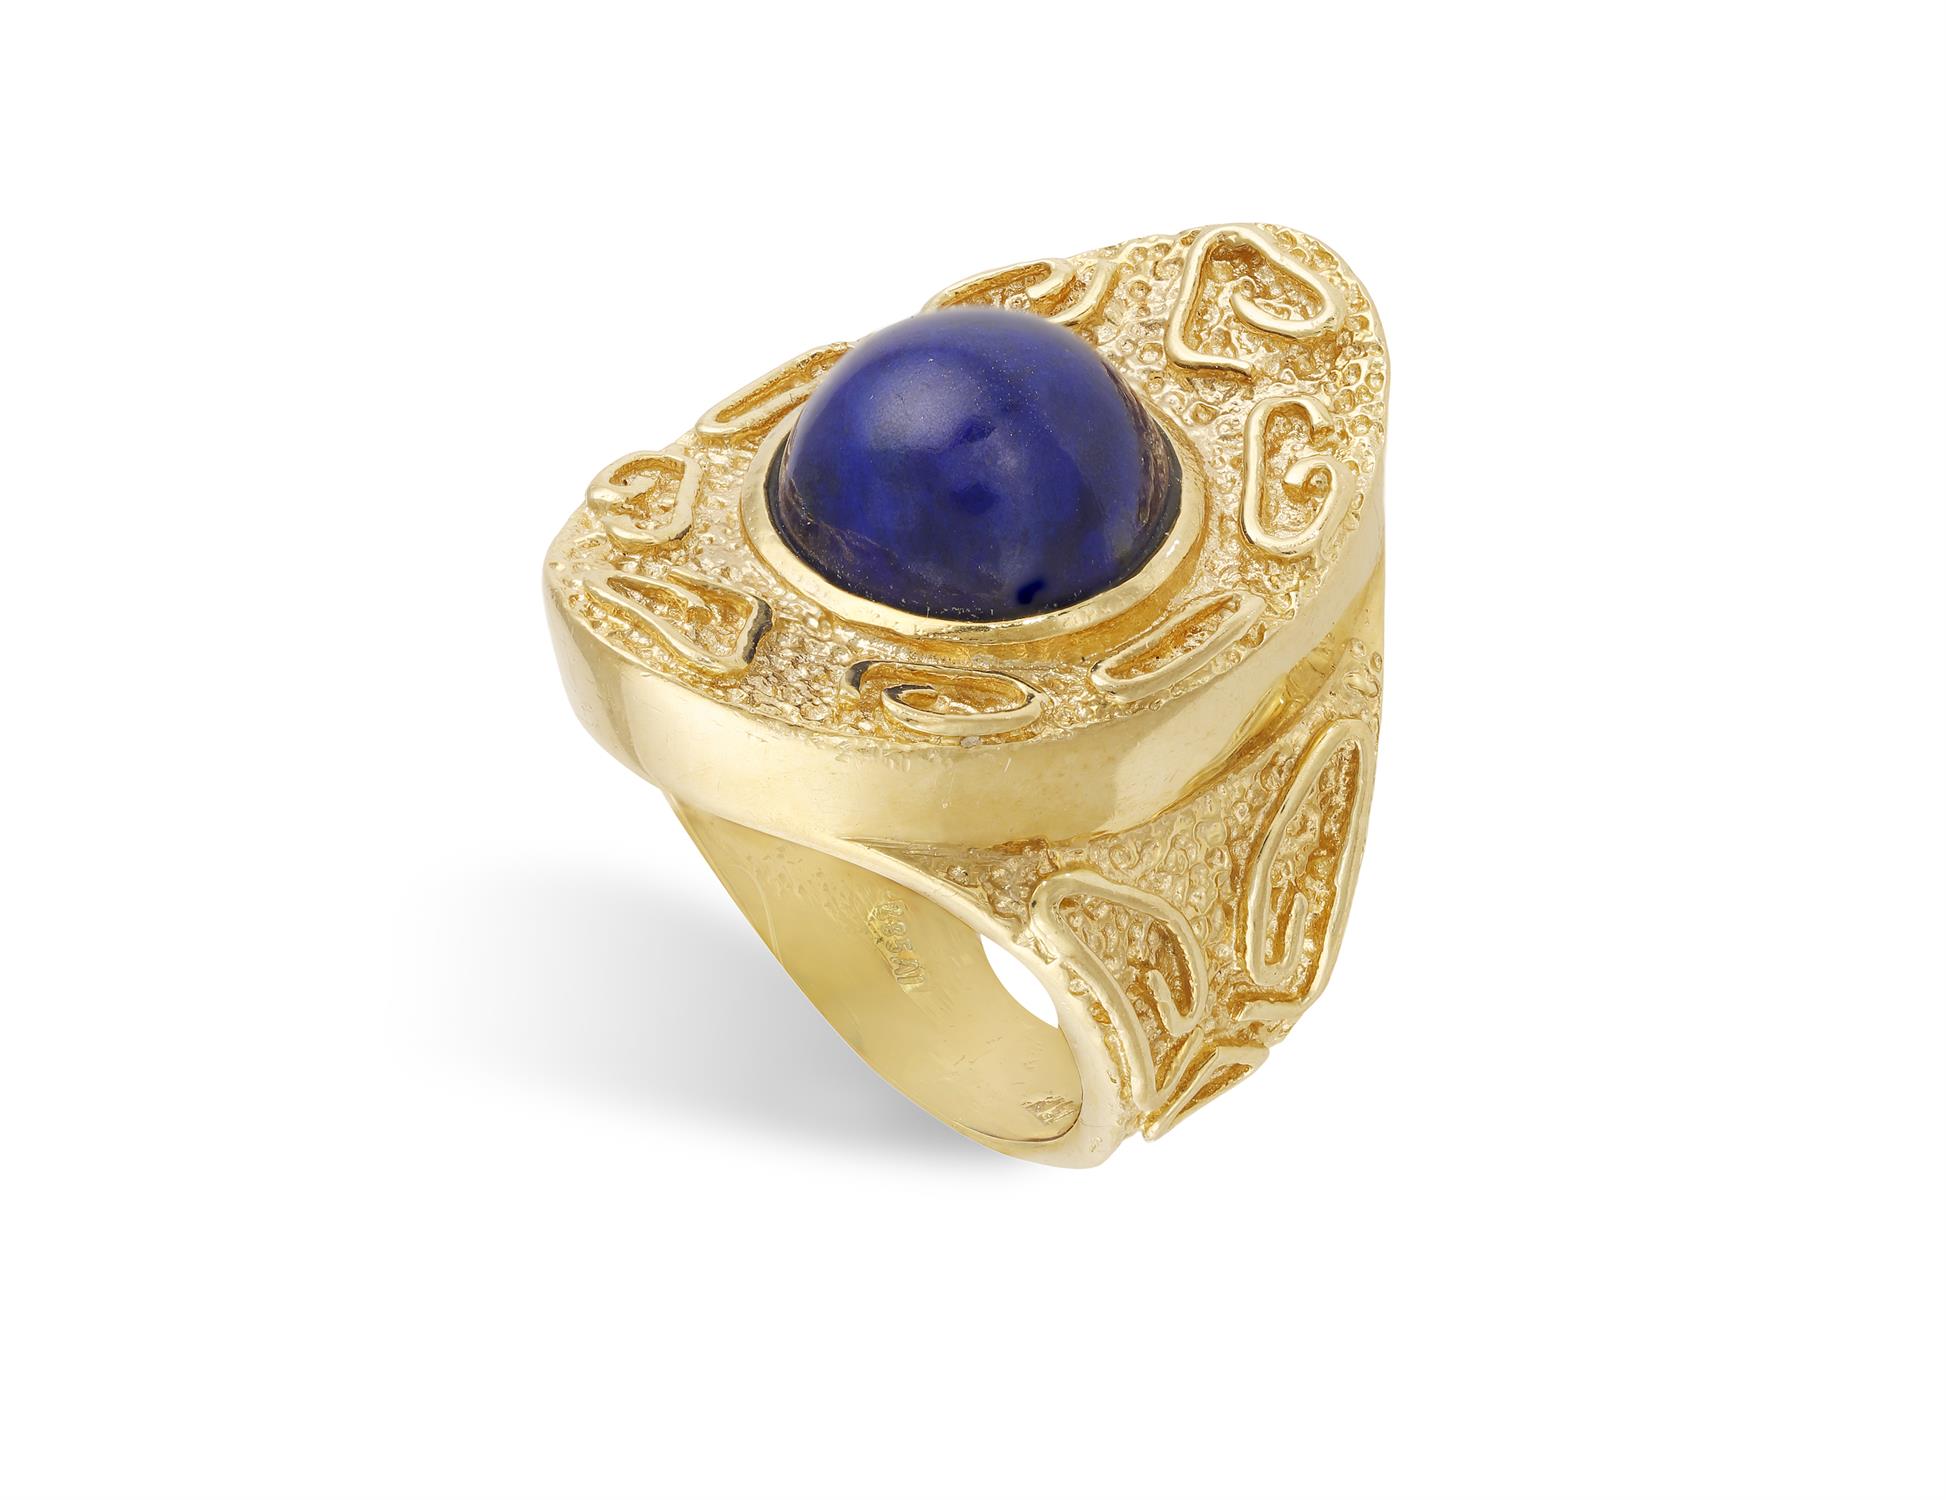 A LAPIS LAZULI AND GOLD RING CIRCA 1970, composed of a central round-shaped cabochon lapis lazuli